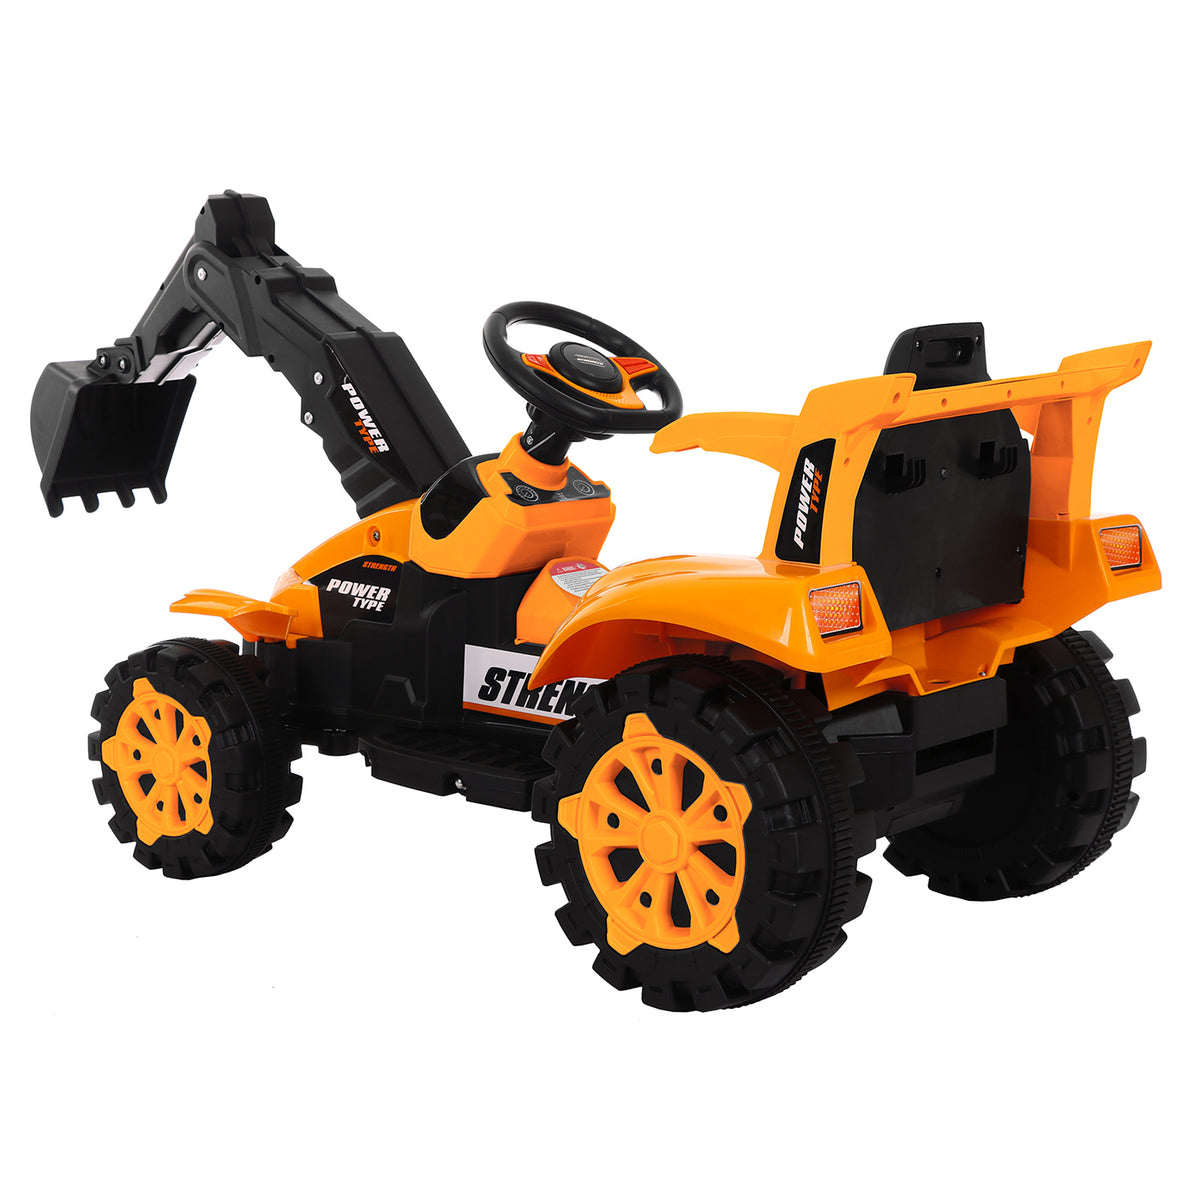 Rear angle view of the Children's Electronic Ride-on Excavator.